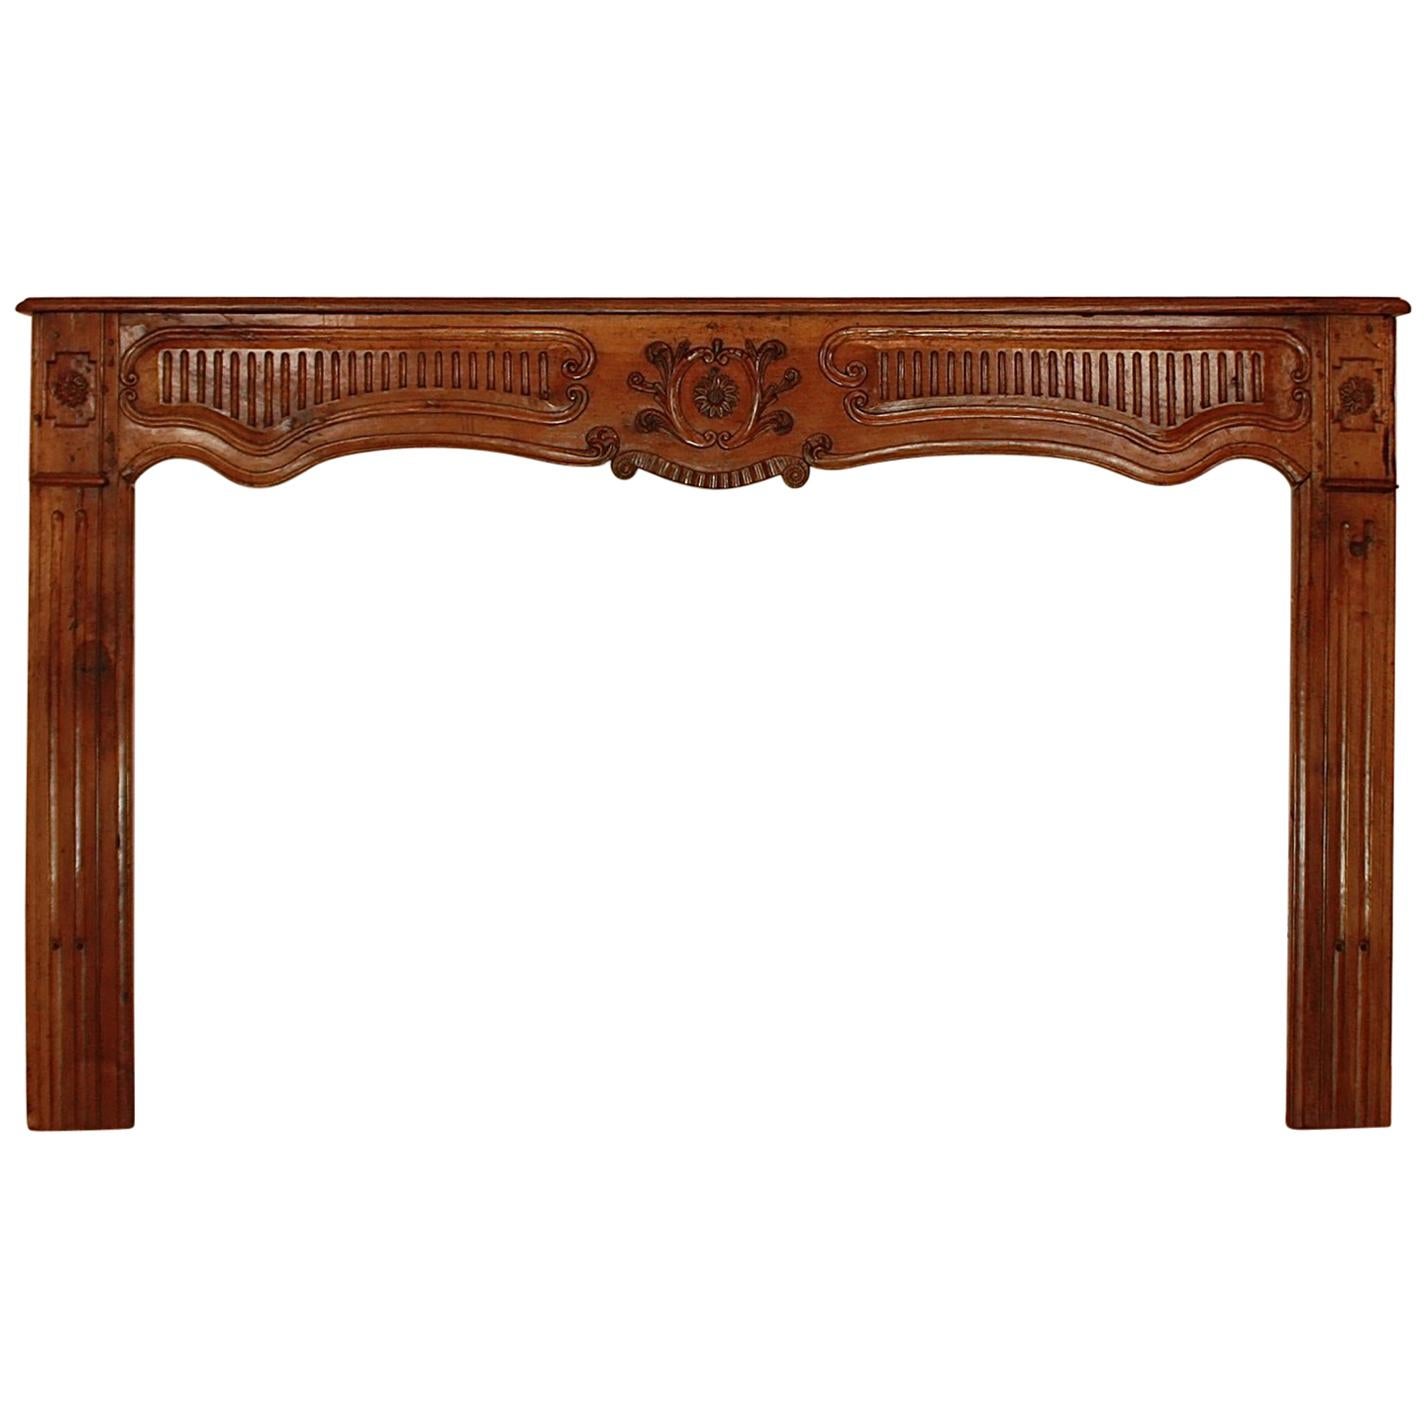 Large Provincial Walnut Fire Surround, Early 18th Century